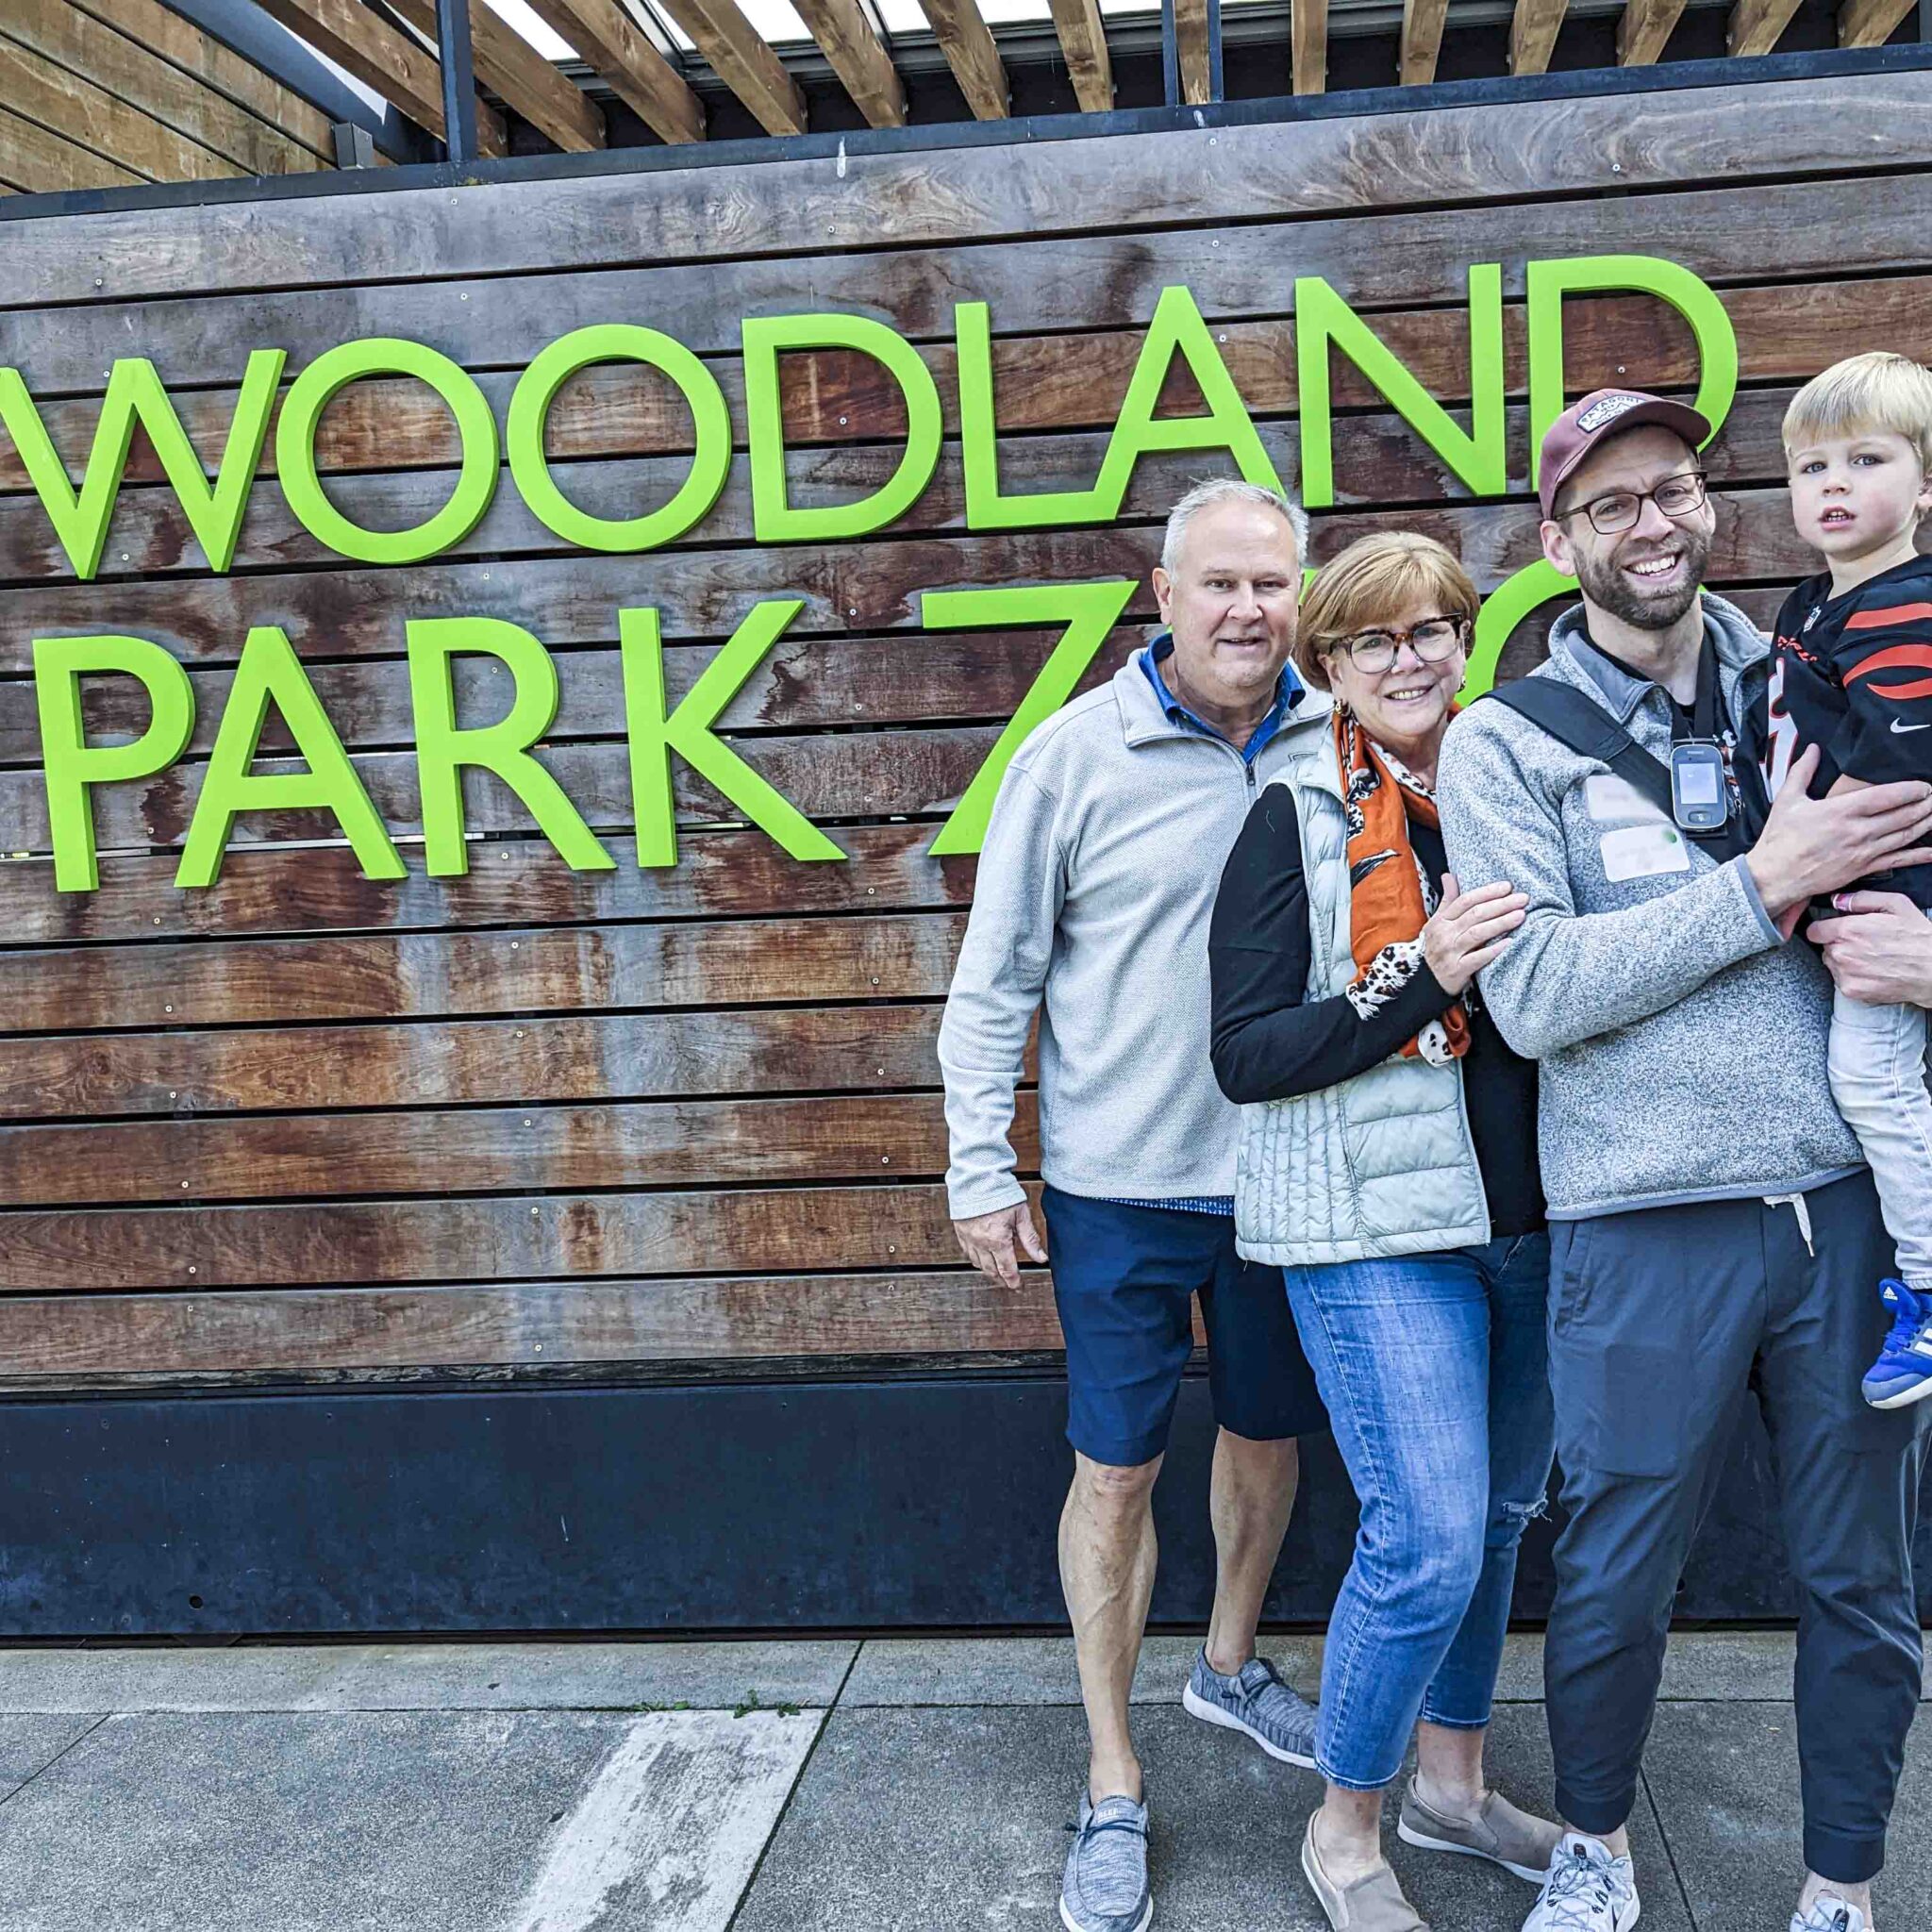 A family poses for a photo in front of Woodland Park Zoo sign.